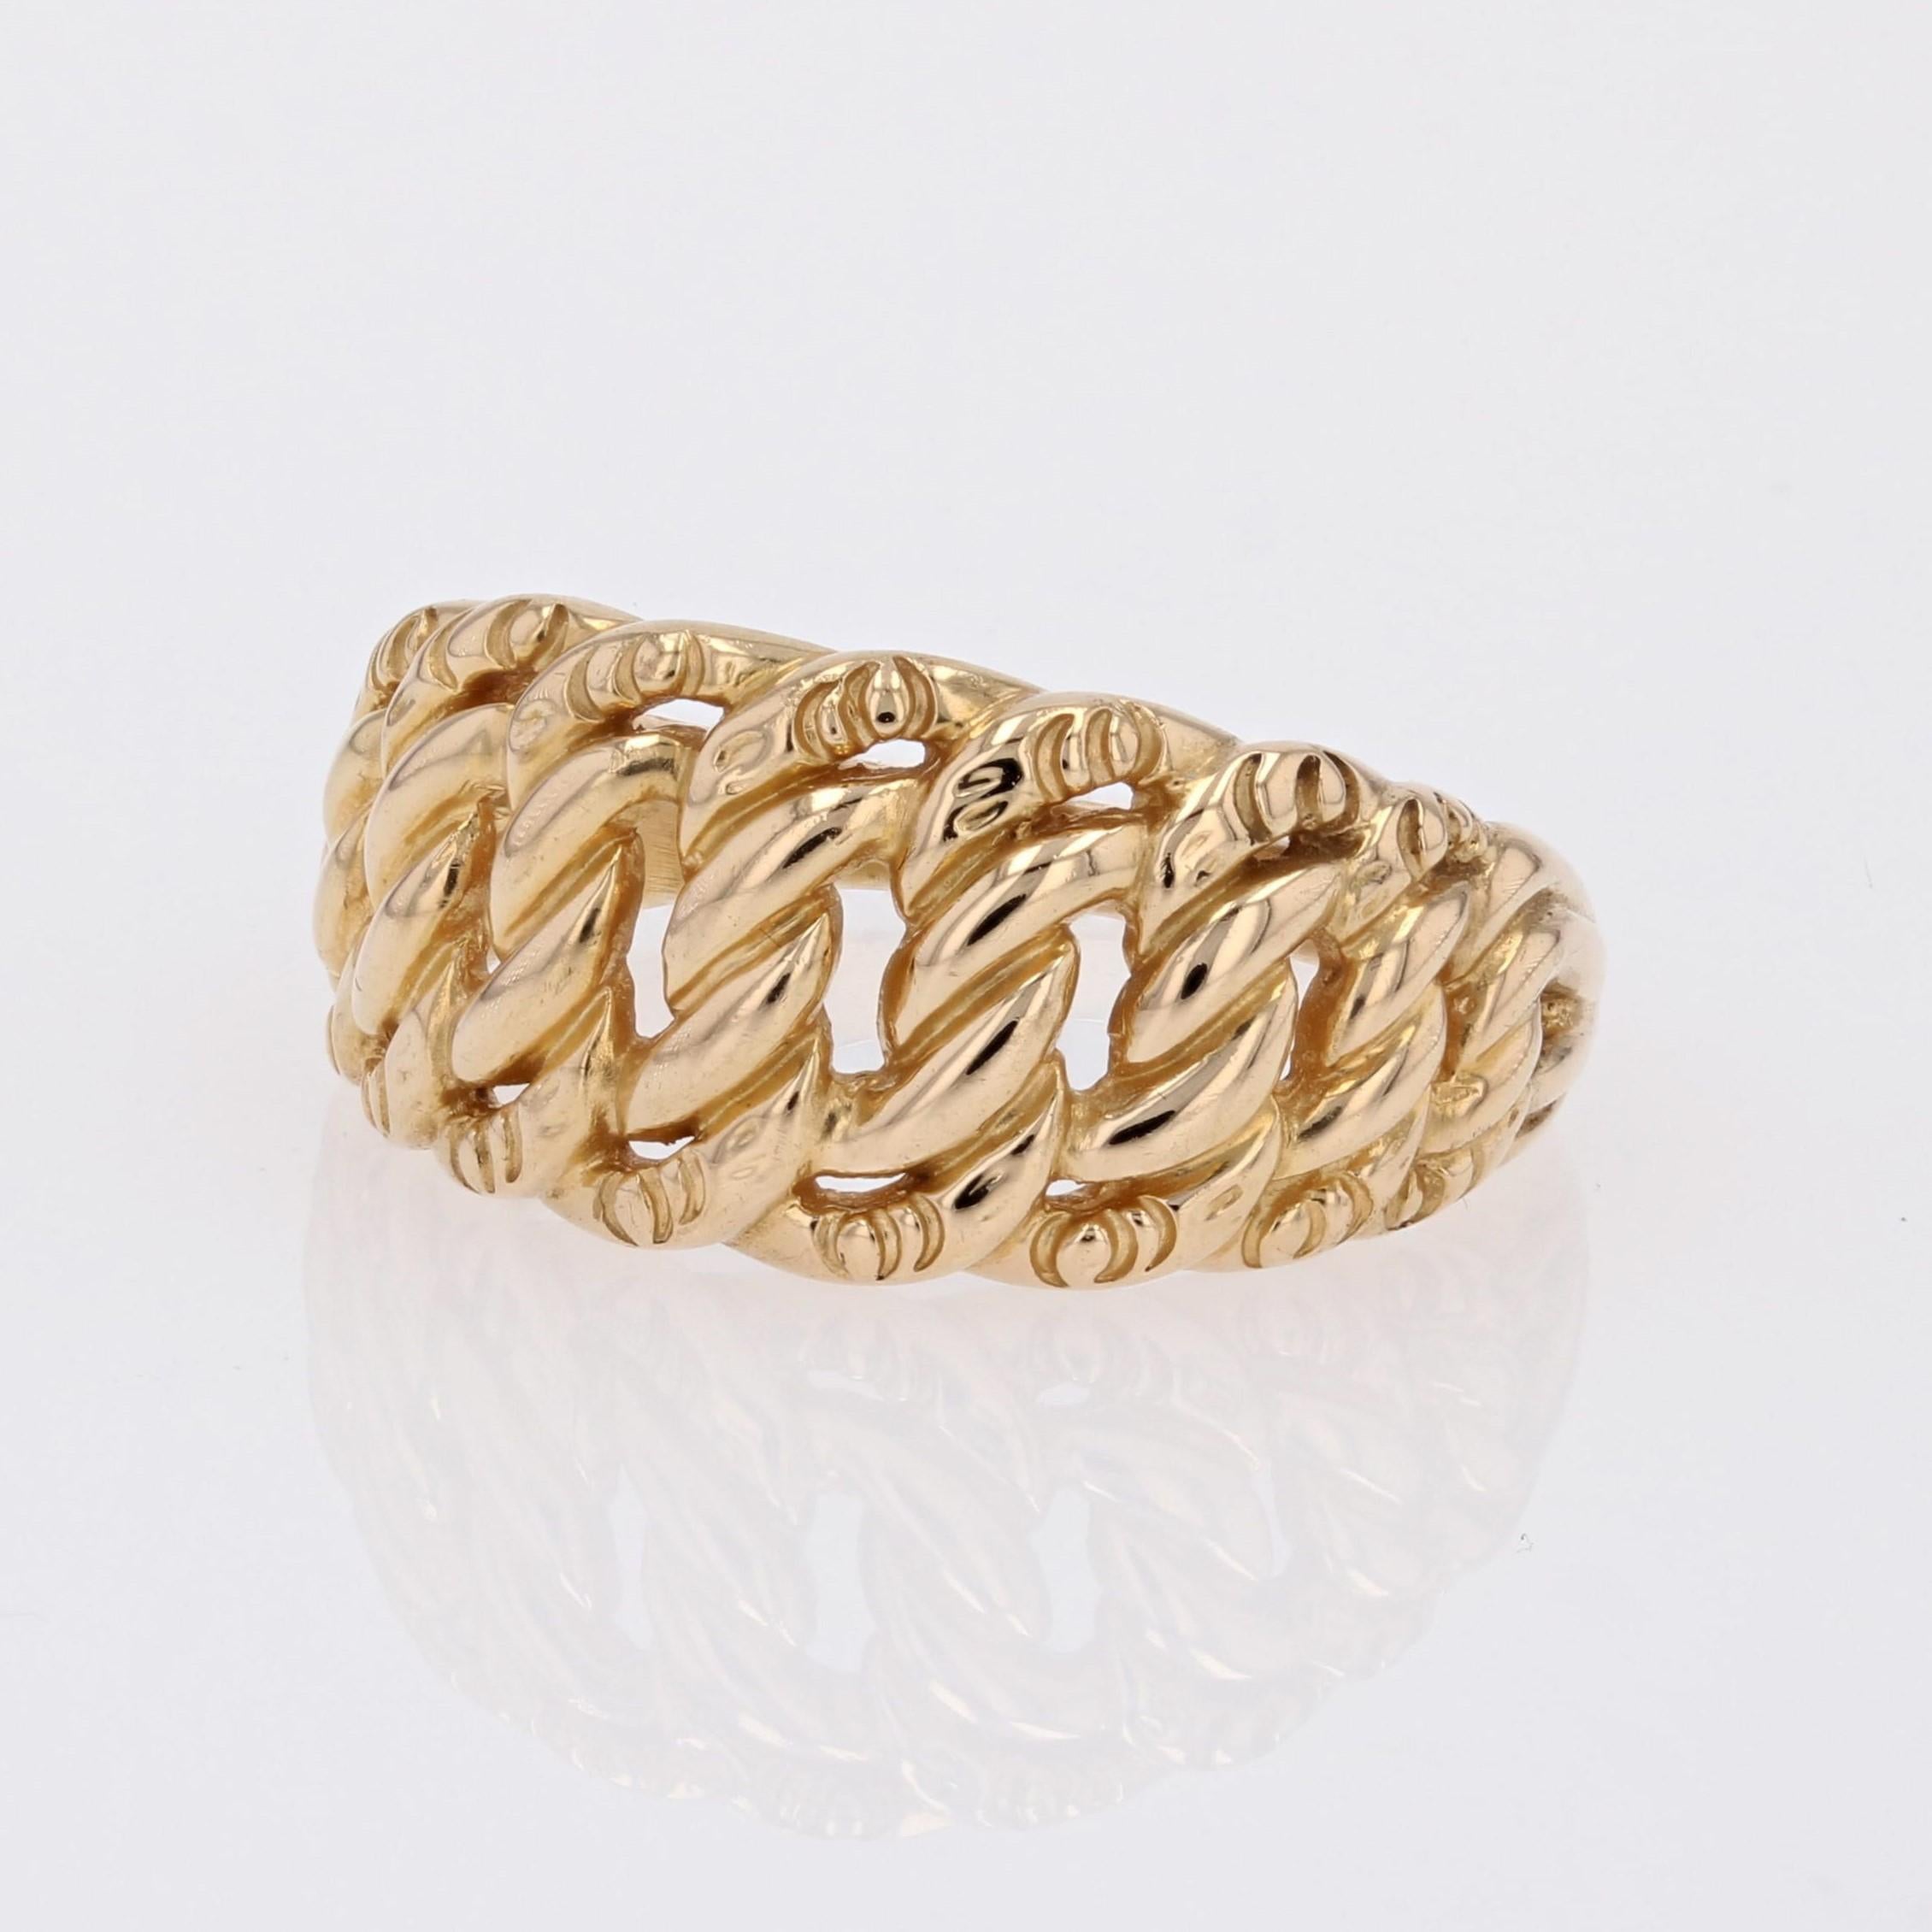 Ring in 18 karat yellow gold, eagle head hallmark.
Based on the motifs of gourmette bracelets, a great classic of antique jewelry, this rigid yellow gold ring is flat on the finger and features a falling gourmette link chased around the